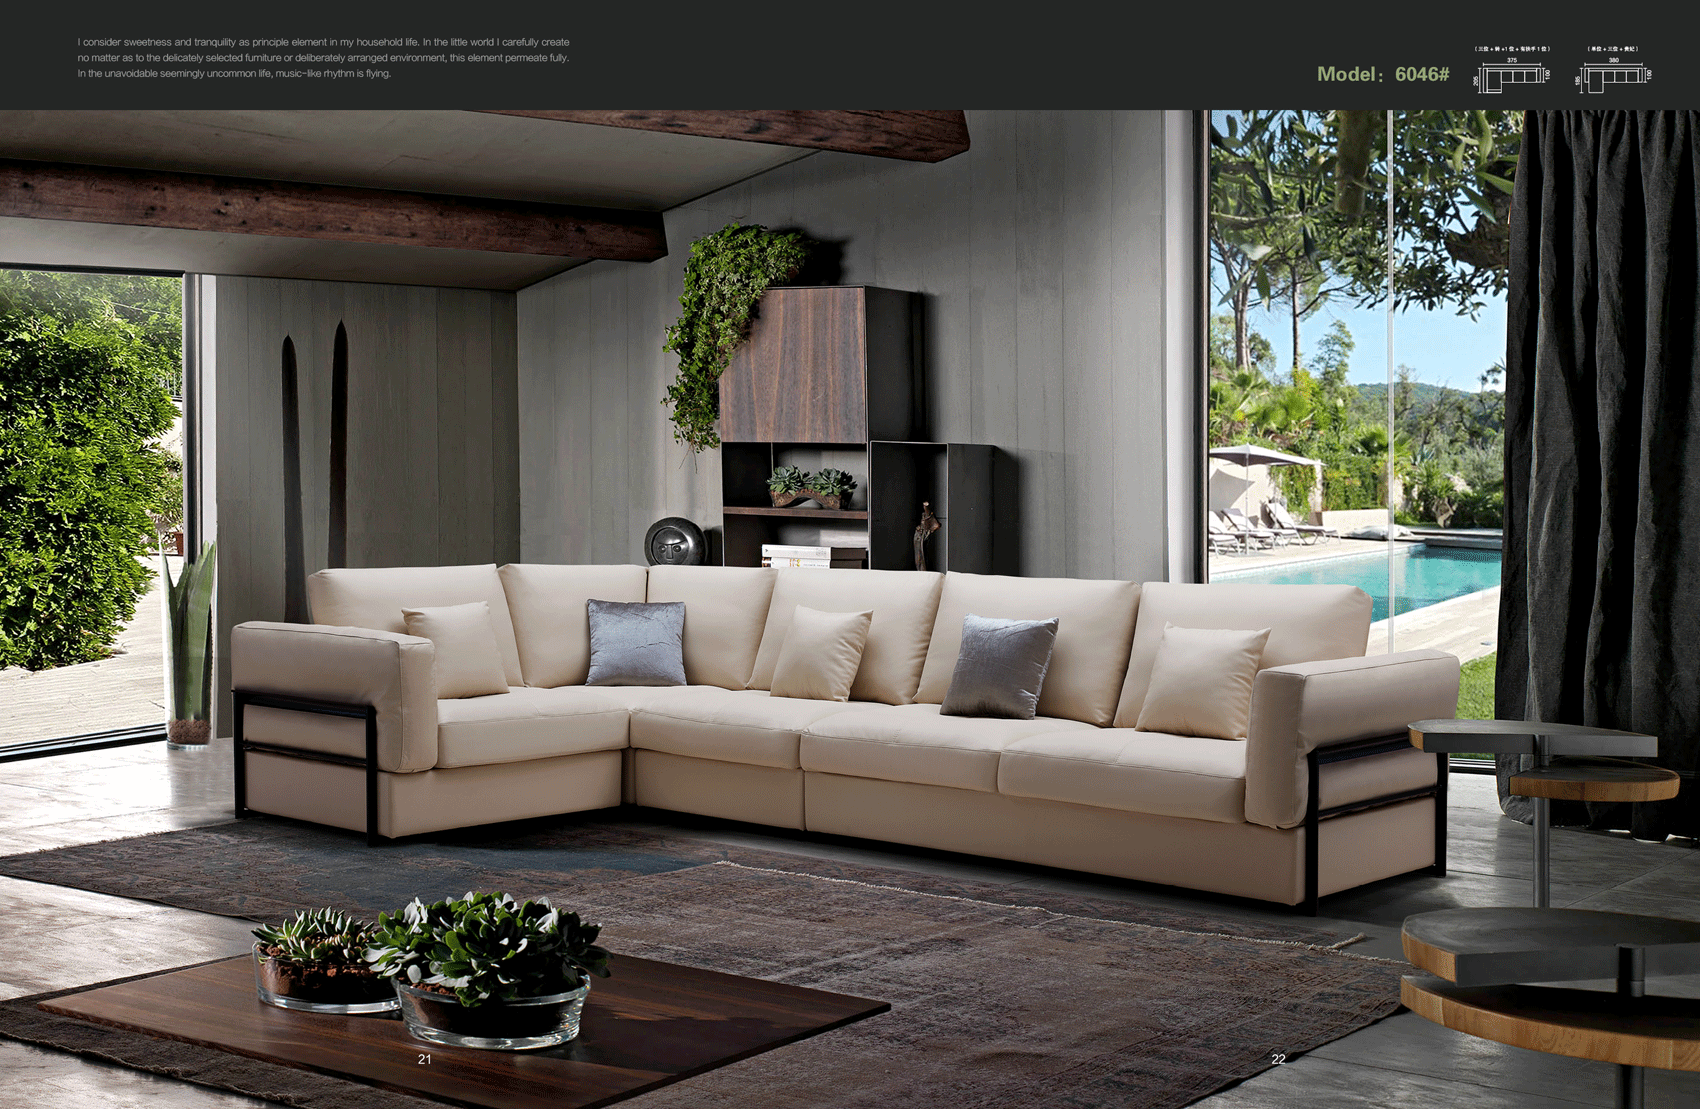 Living Room Furniture Sleepers Sofas Loveseats and Chairs 6046 Sectional